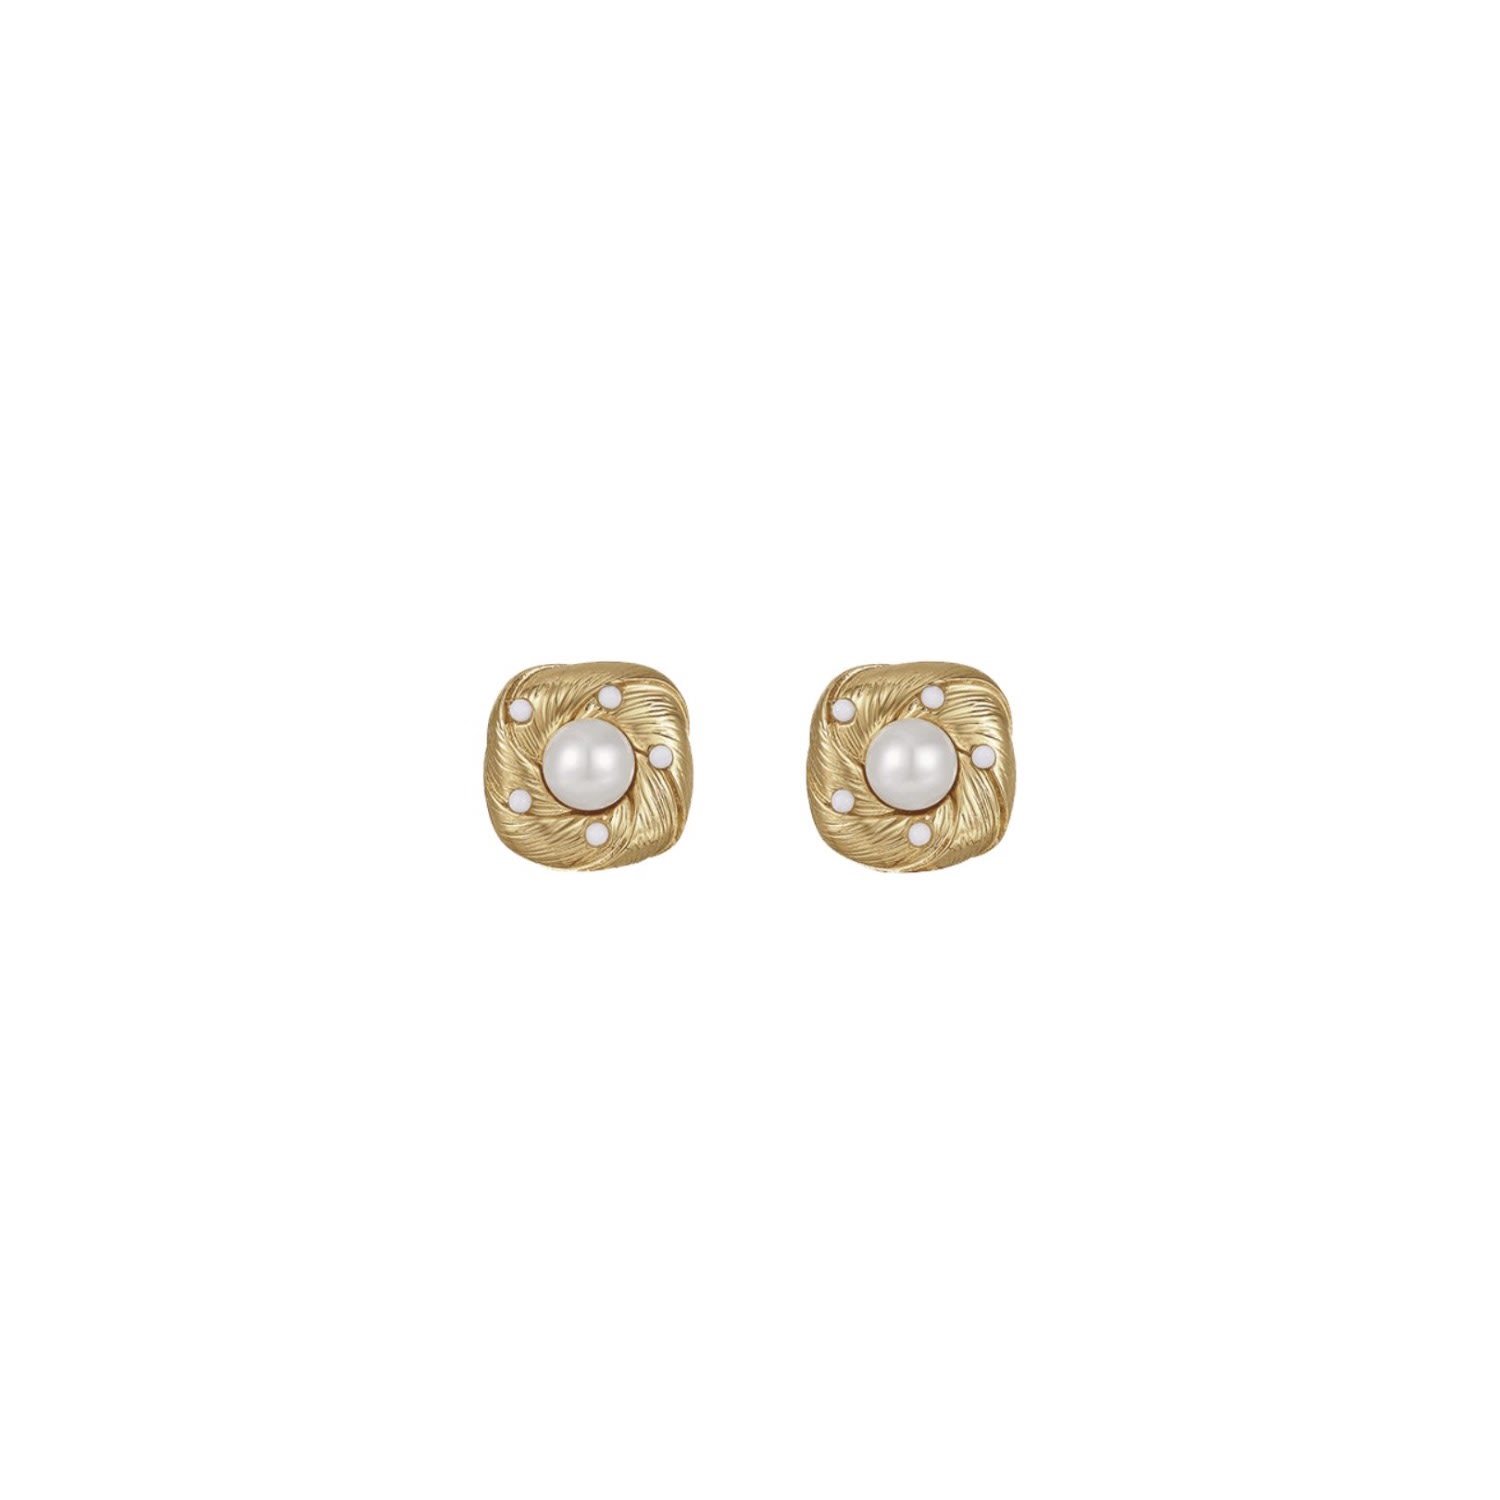 Women’s Gold / White Canary Ear Stud Retro Chic